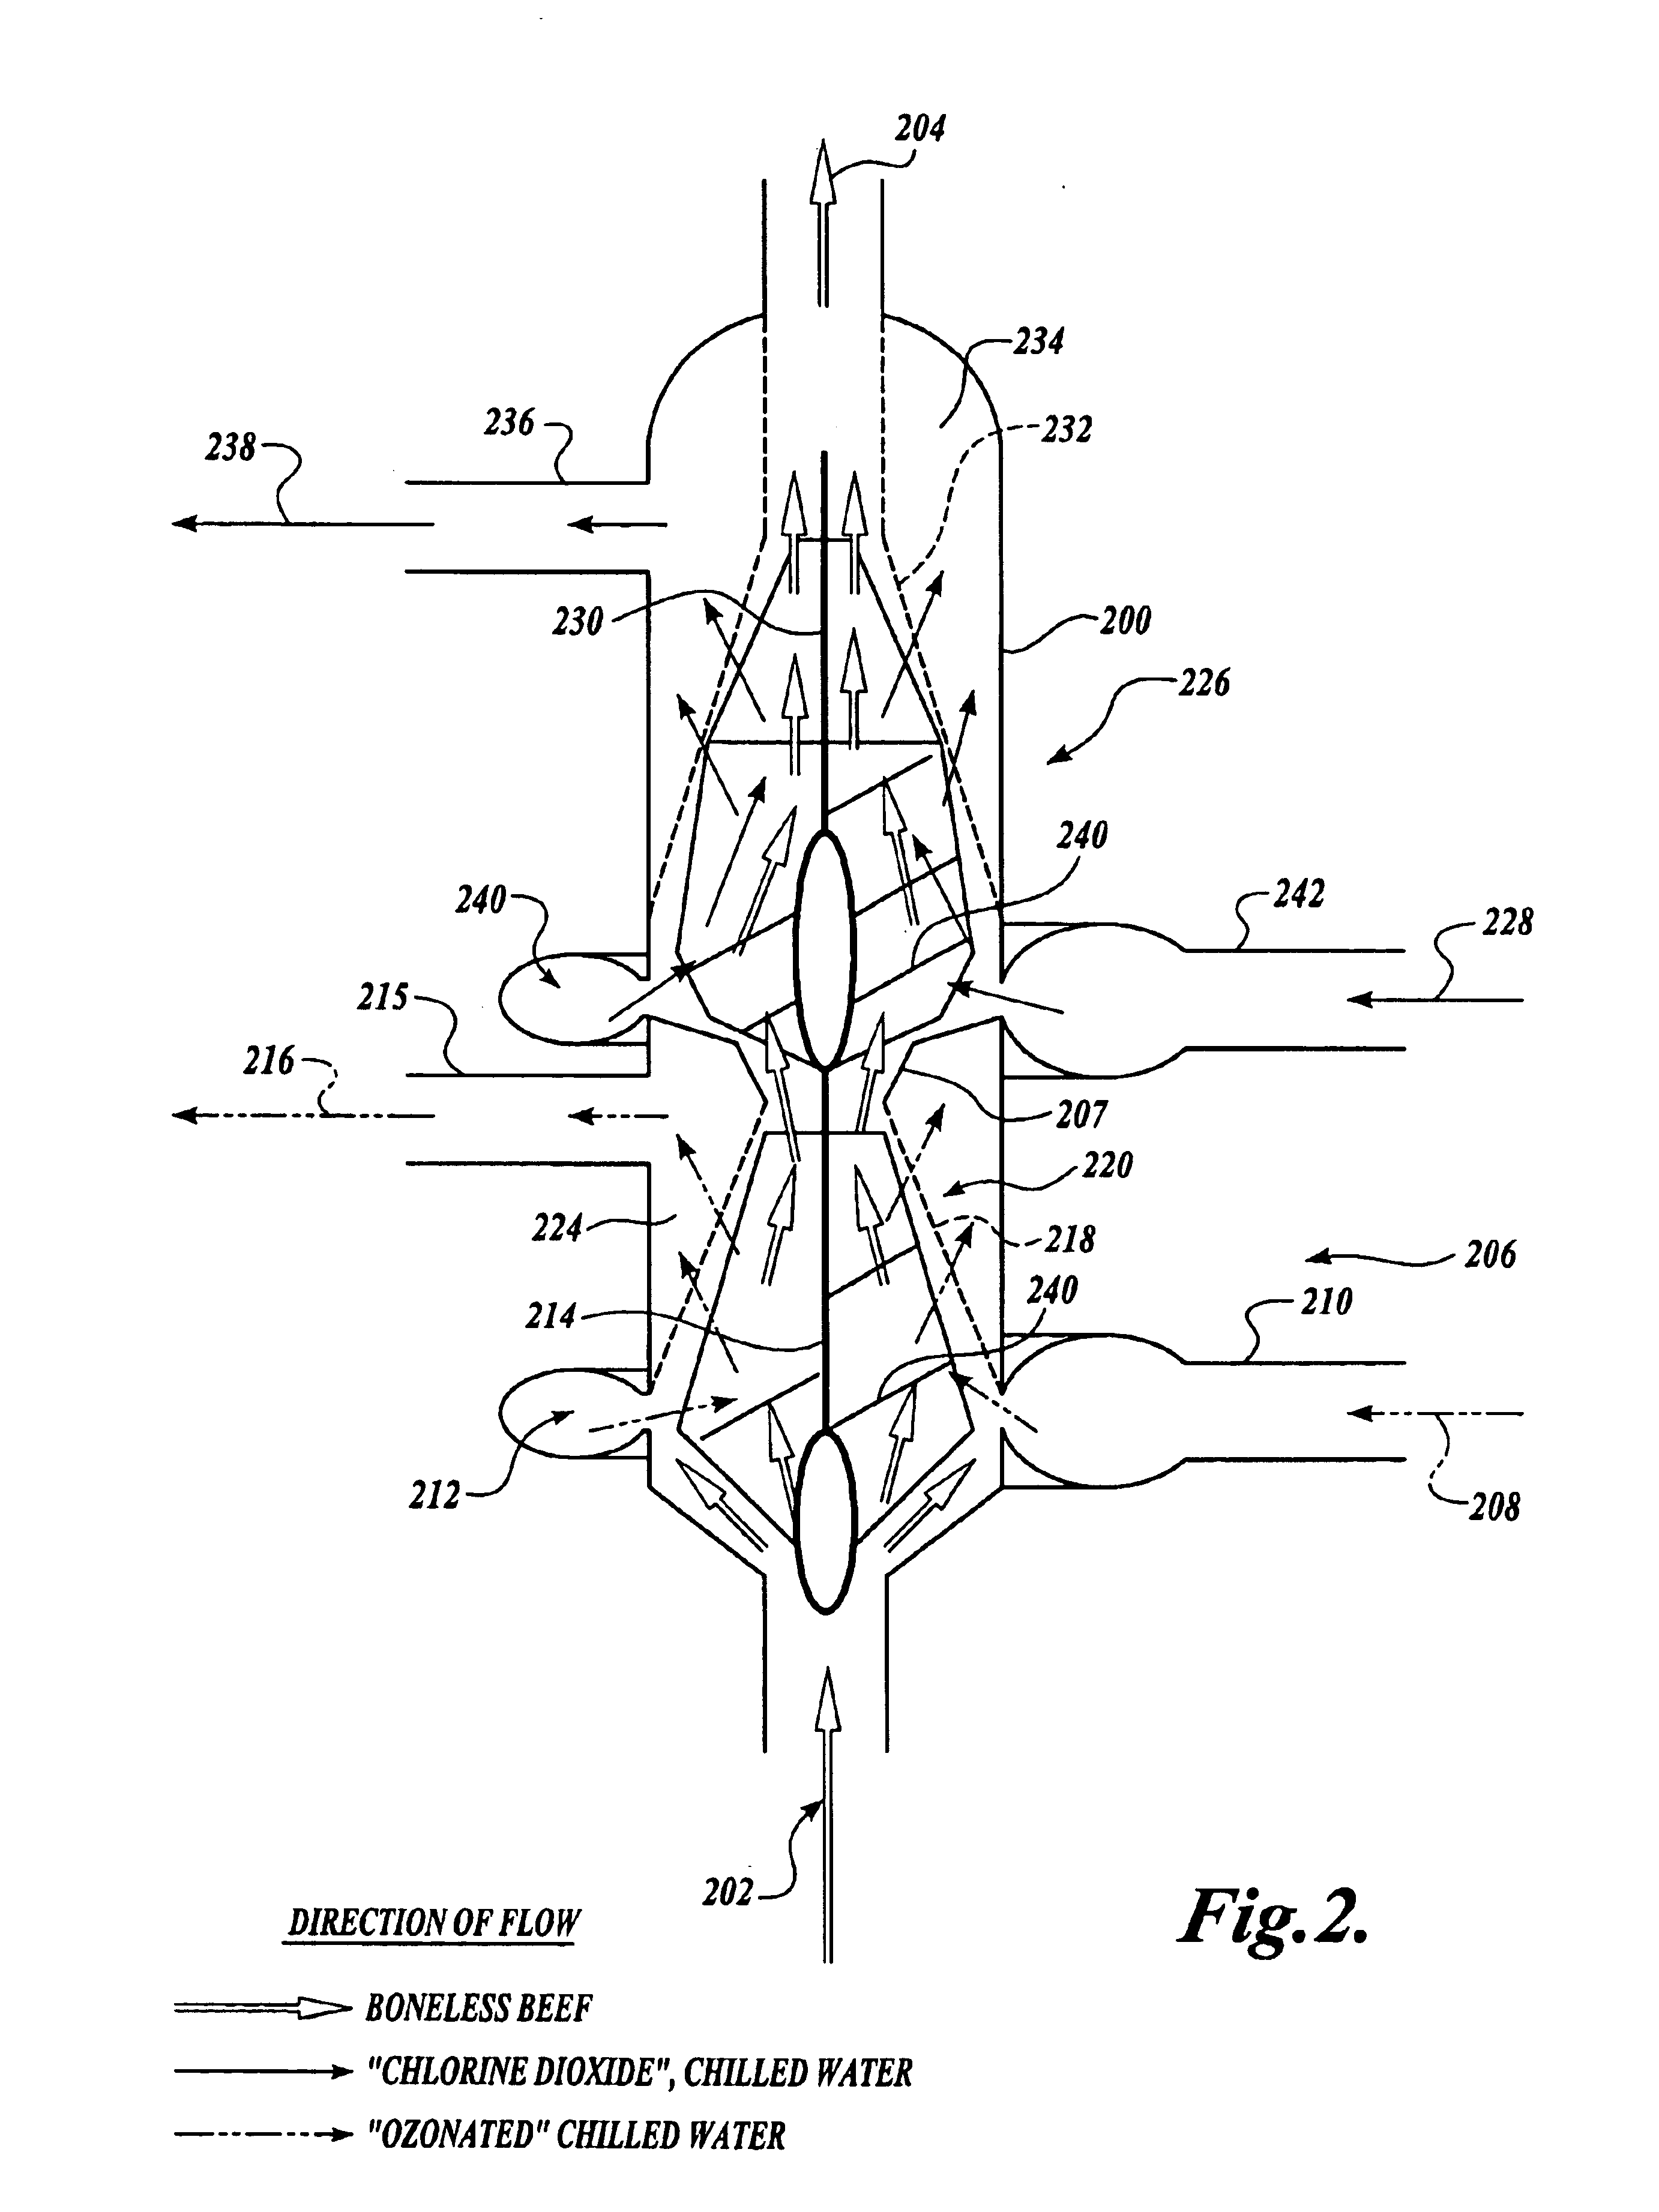 Method and apparatus for sanitizing perishable goods in enclosed conduits